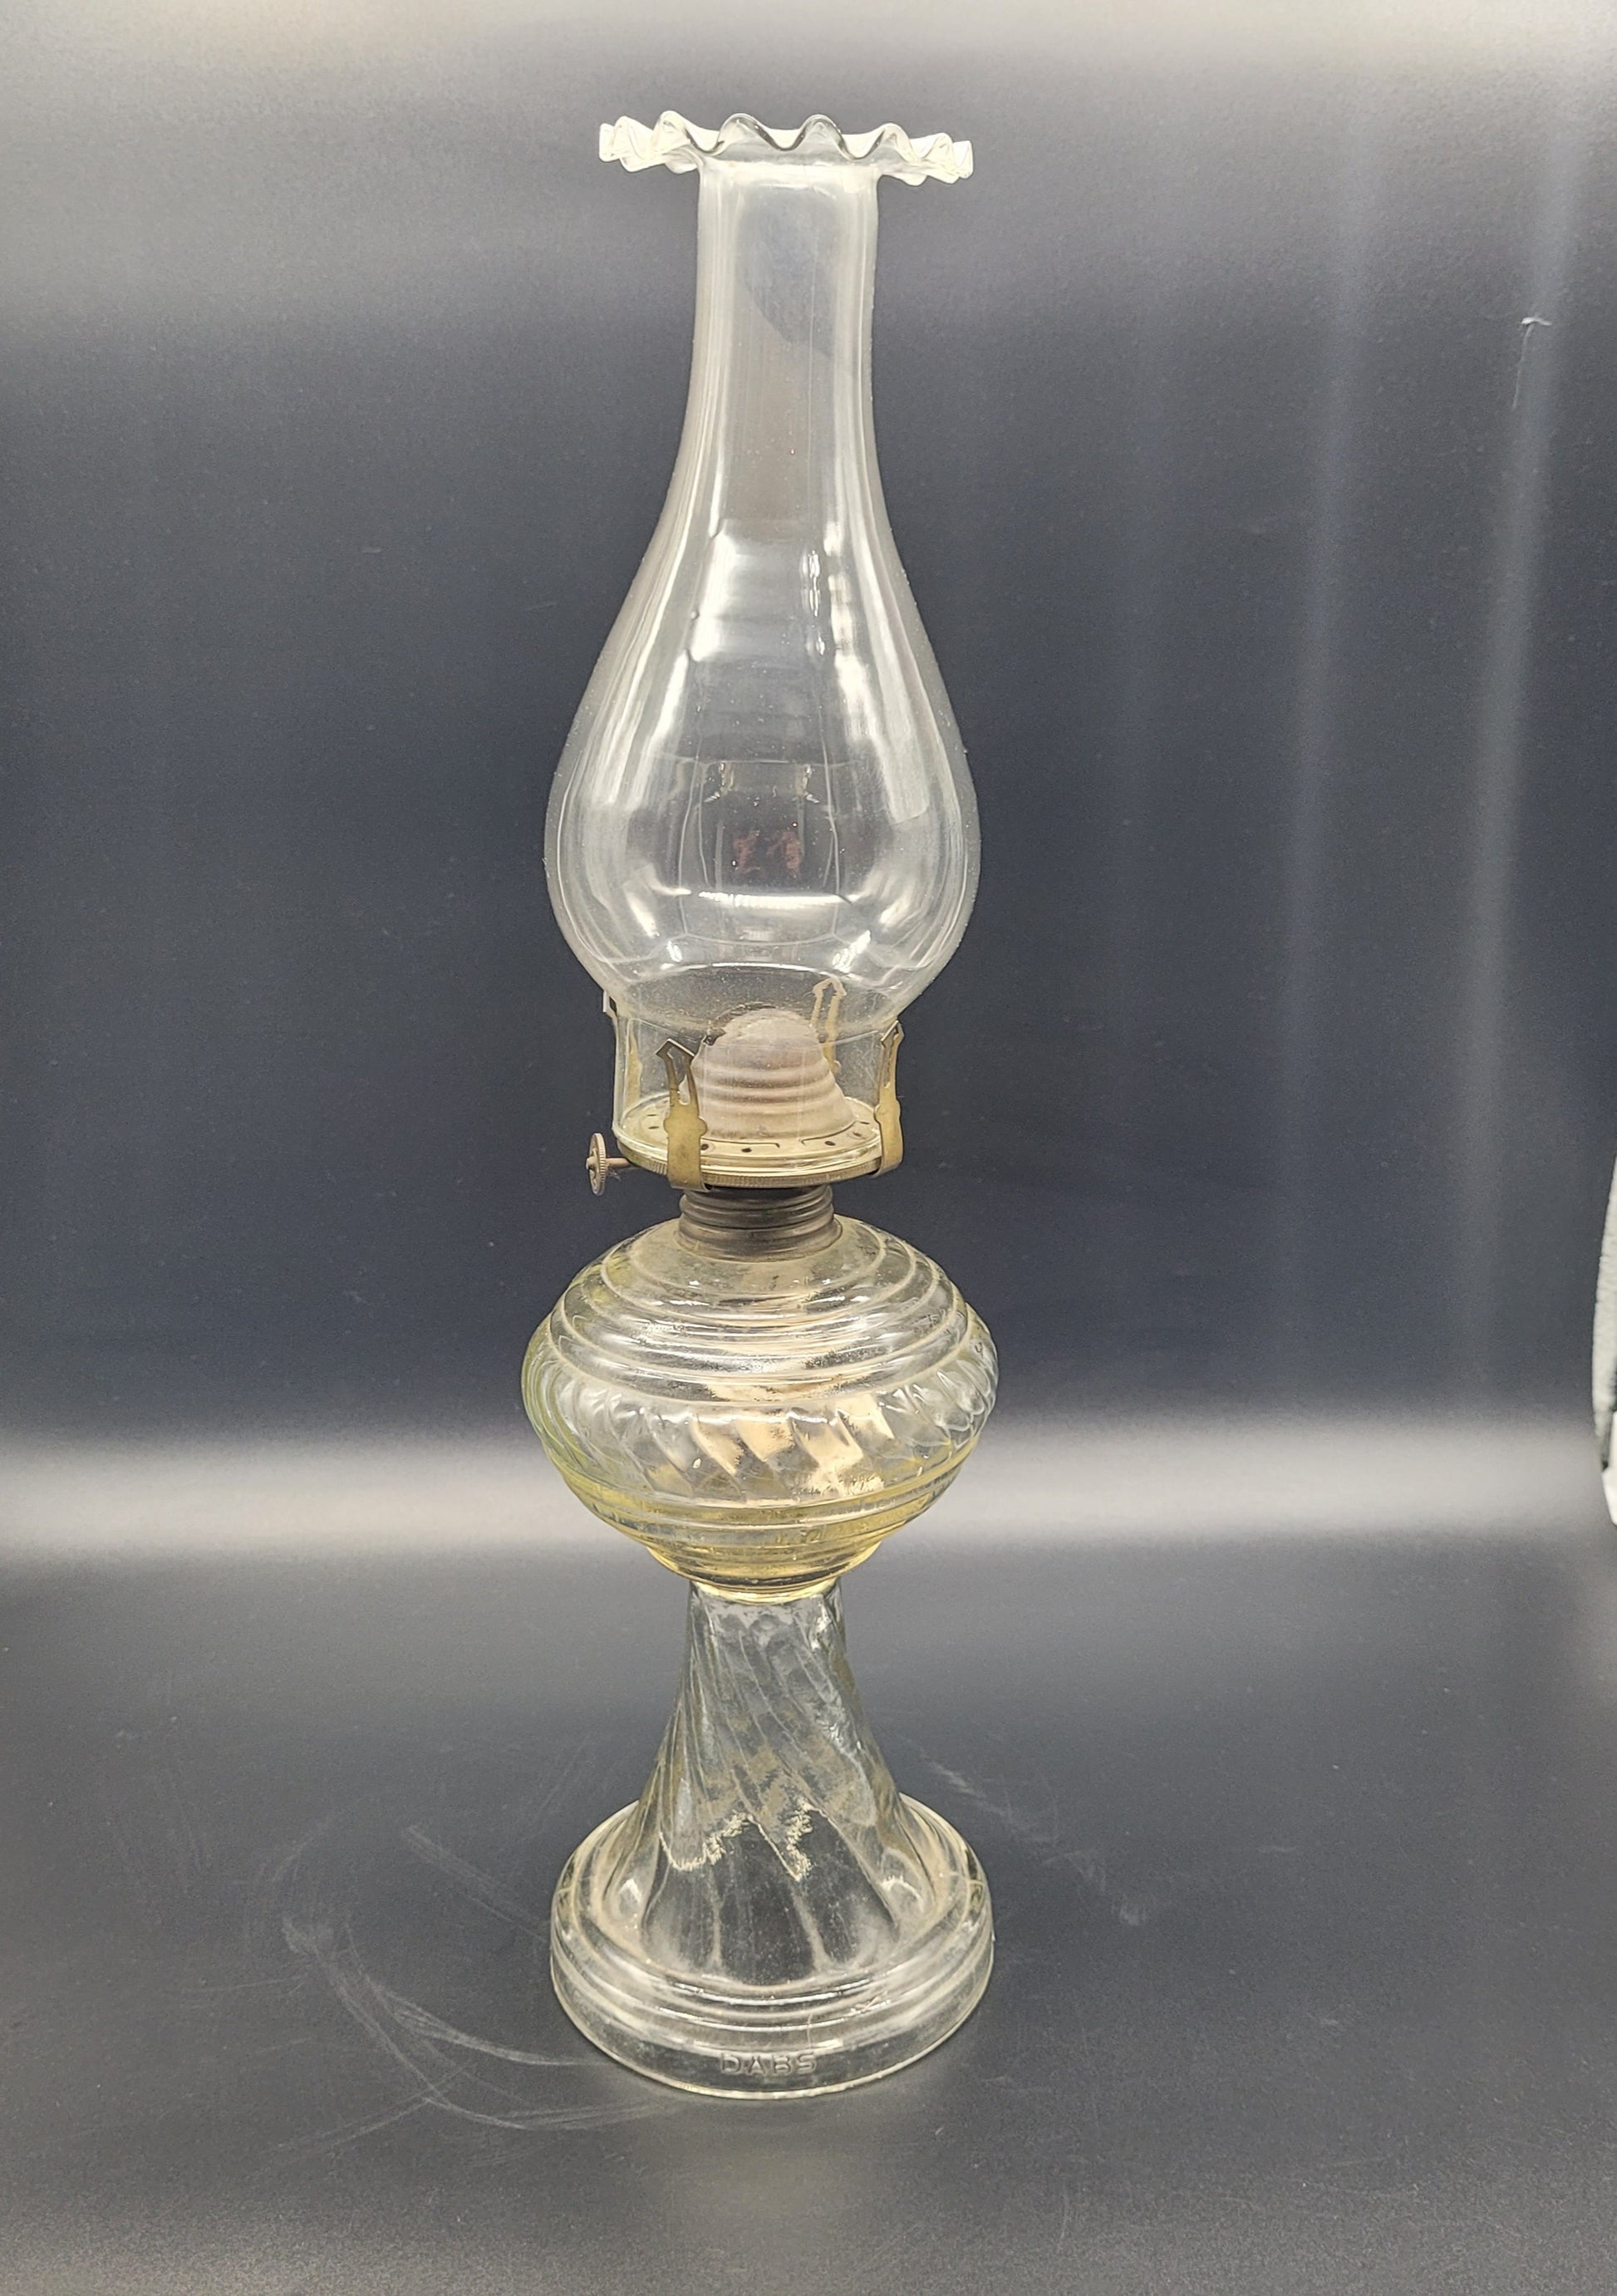 A Rare and Beautiful "Dabbs" Brand Oil Lamp late 1800s